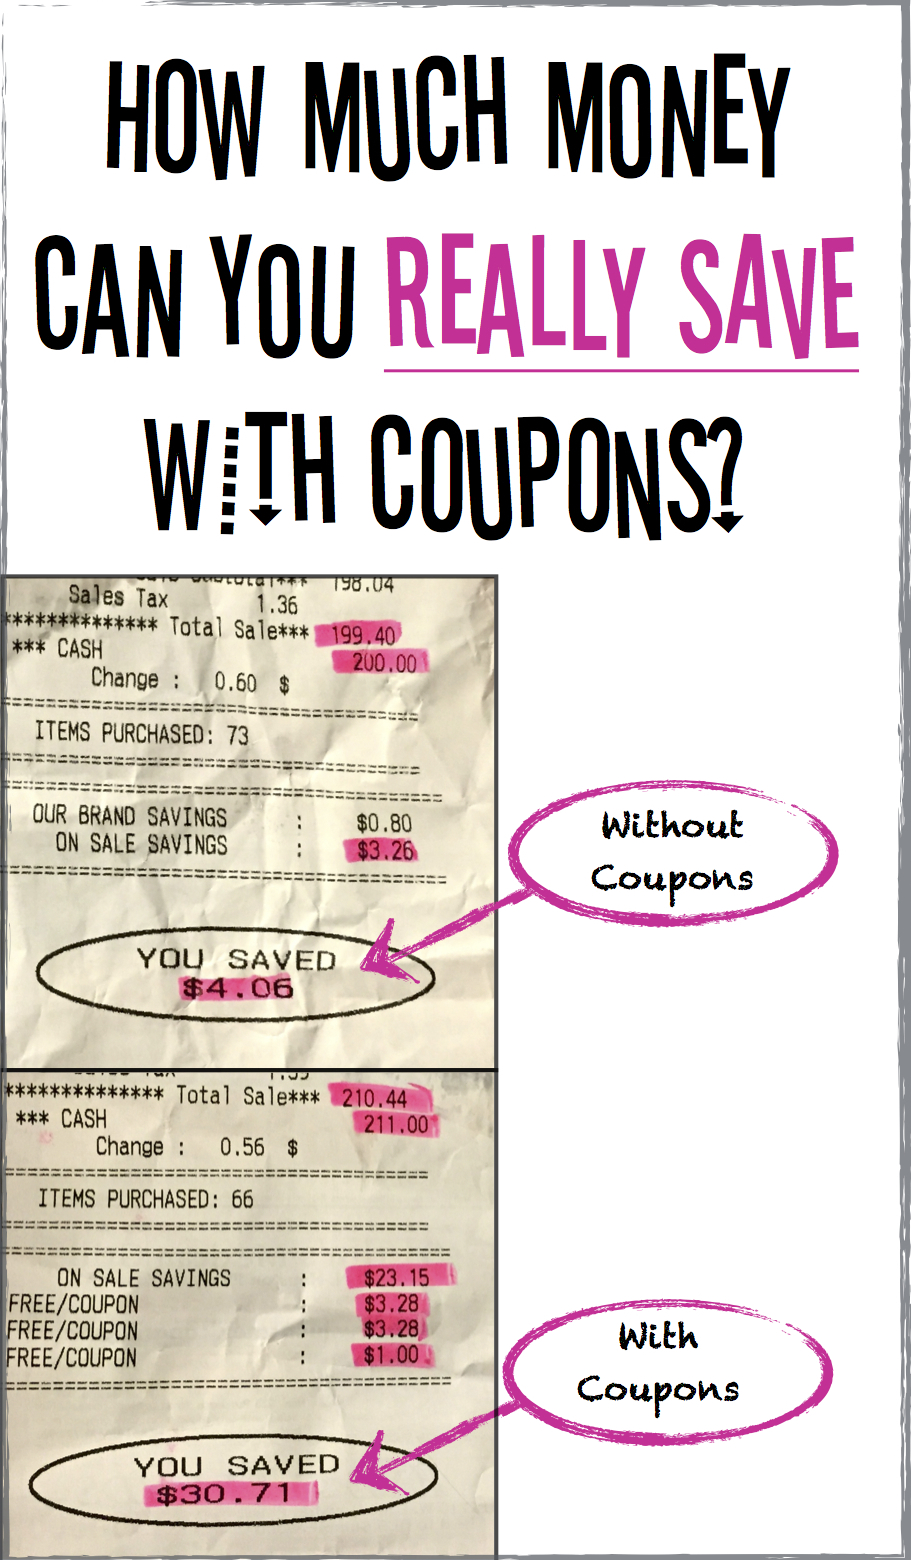 How much money can you realistically save on groceries using coupons?